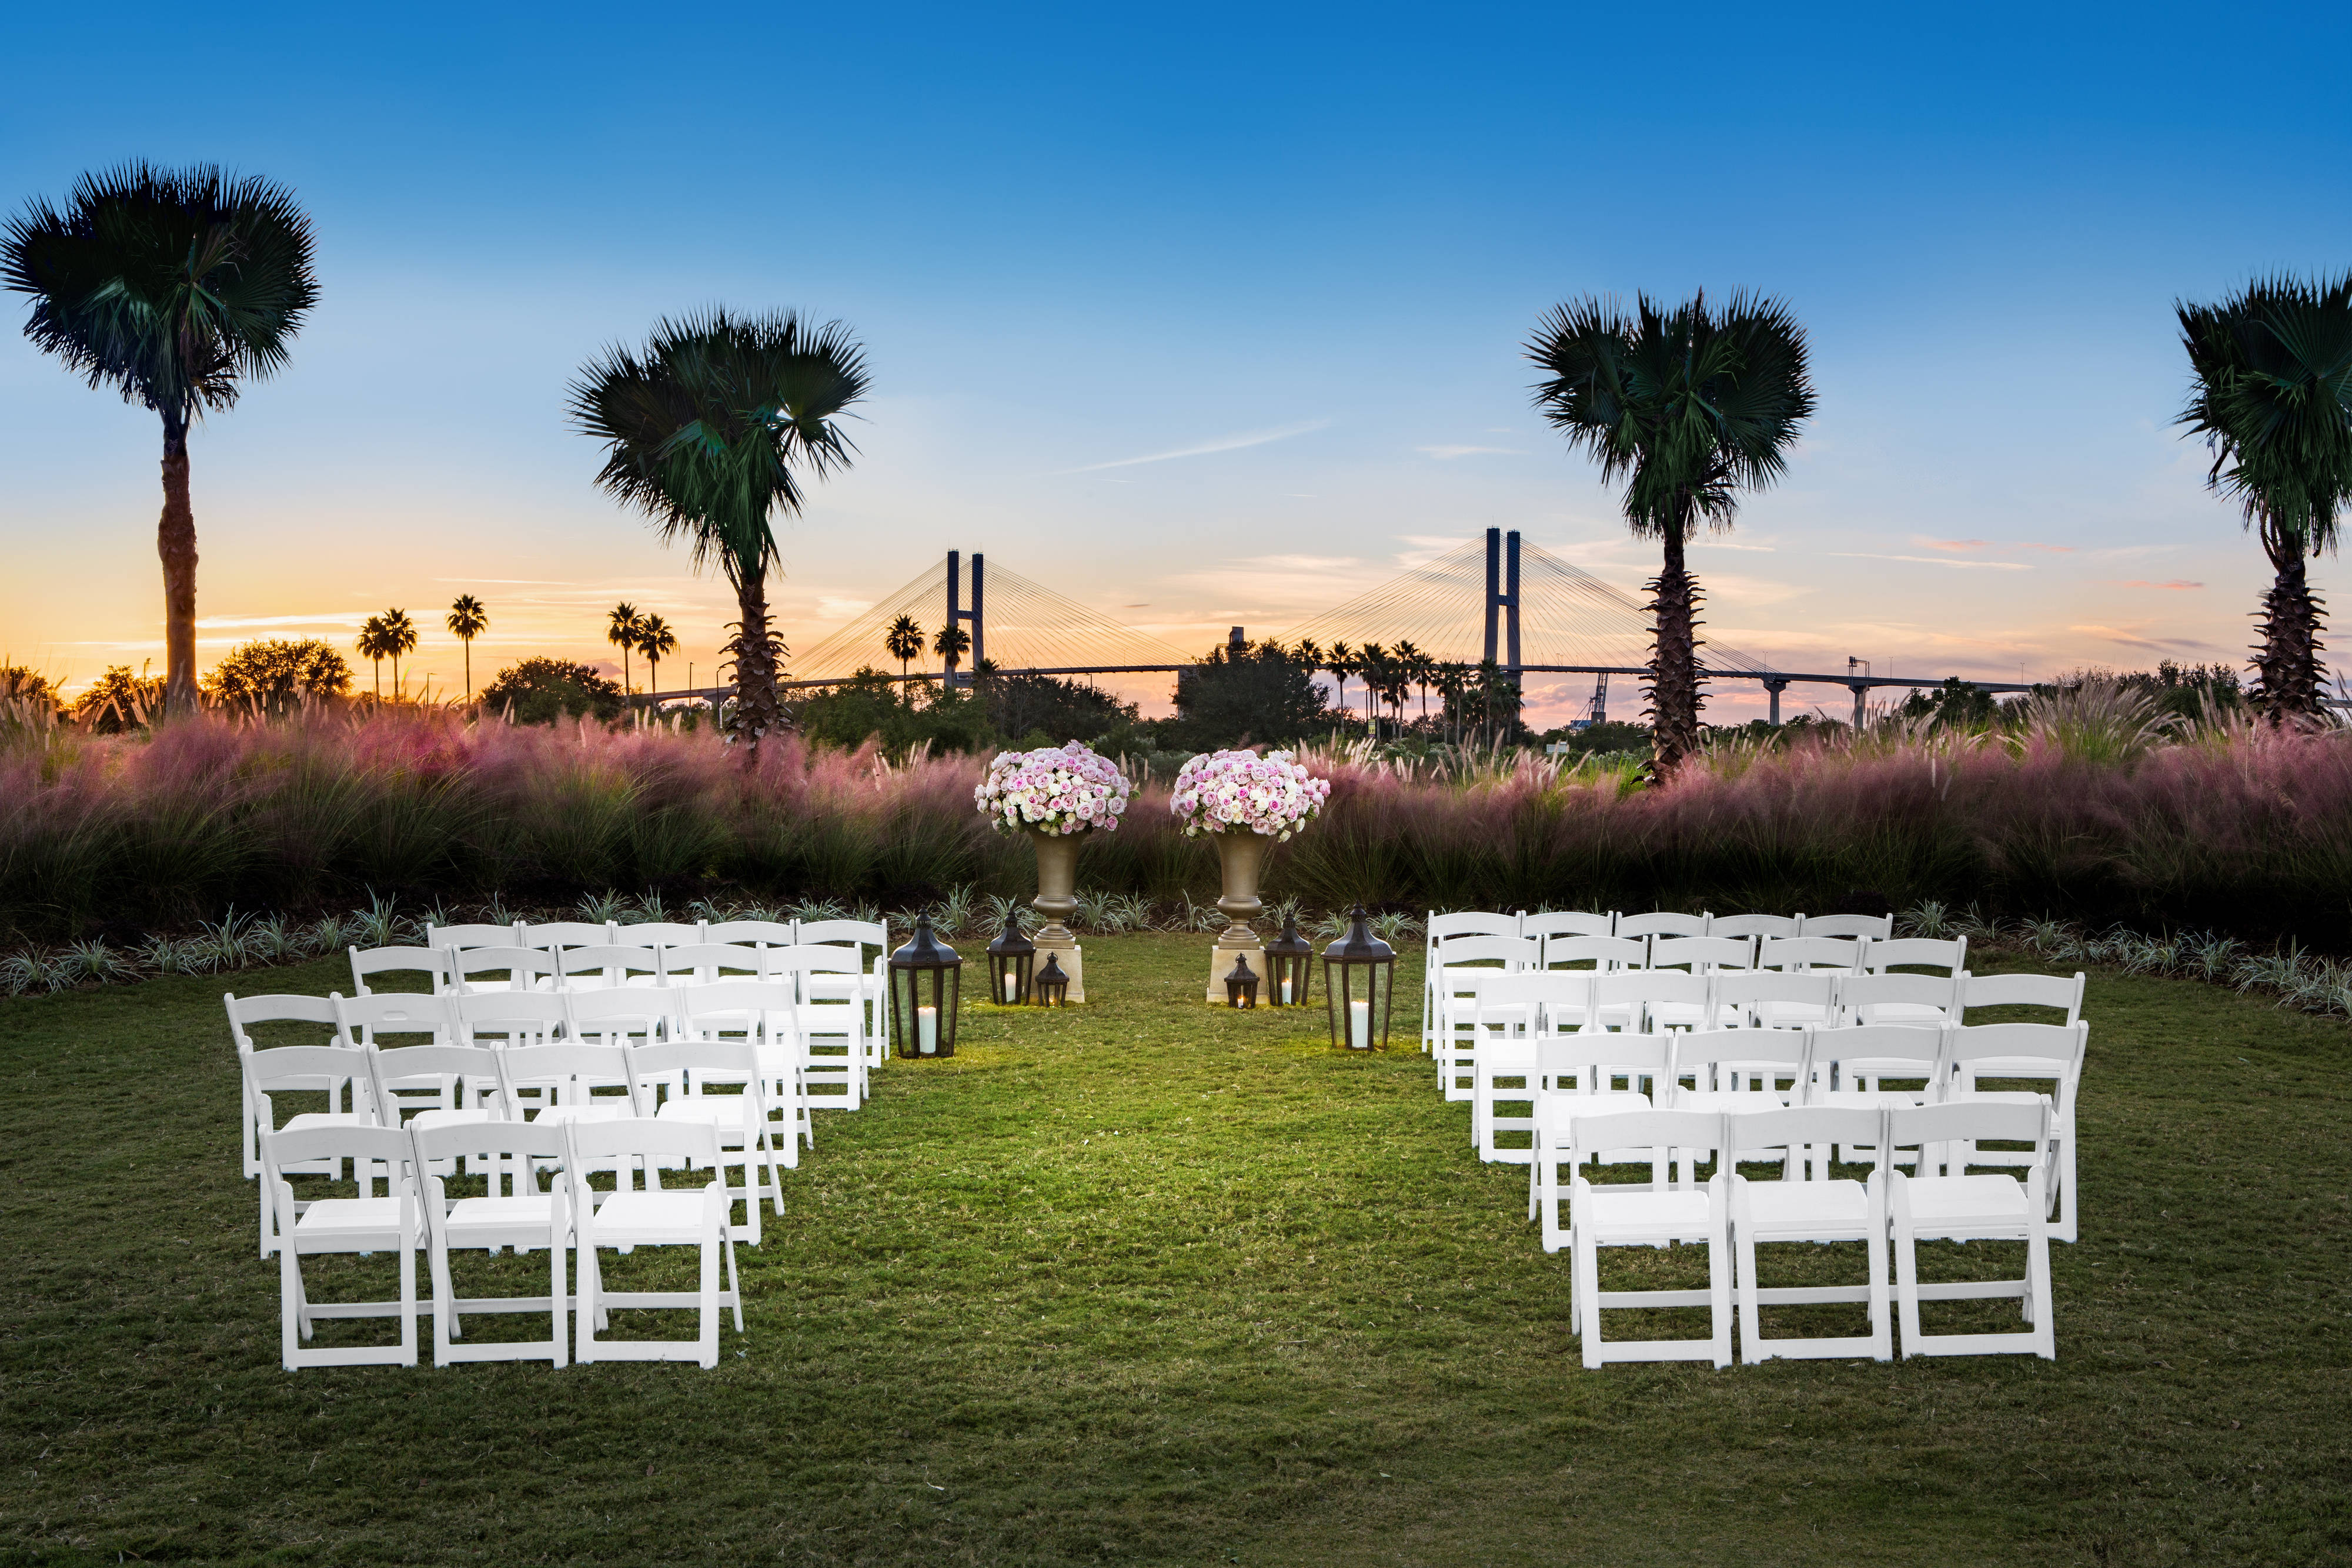 Landscaped Club Lawn with view of bridge set for intimate wedding